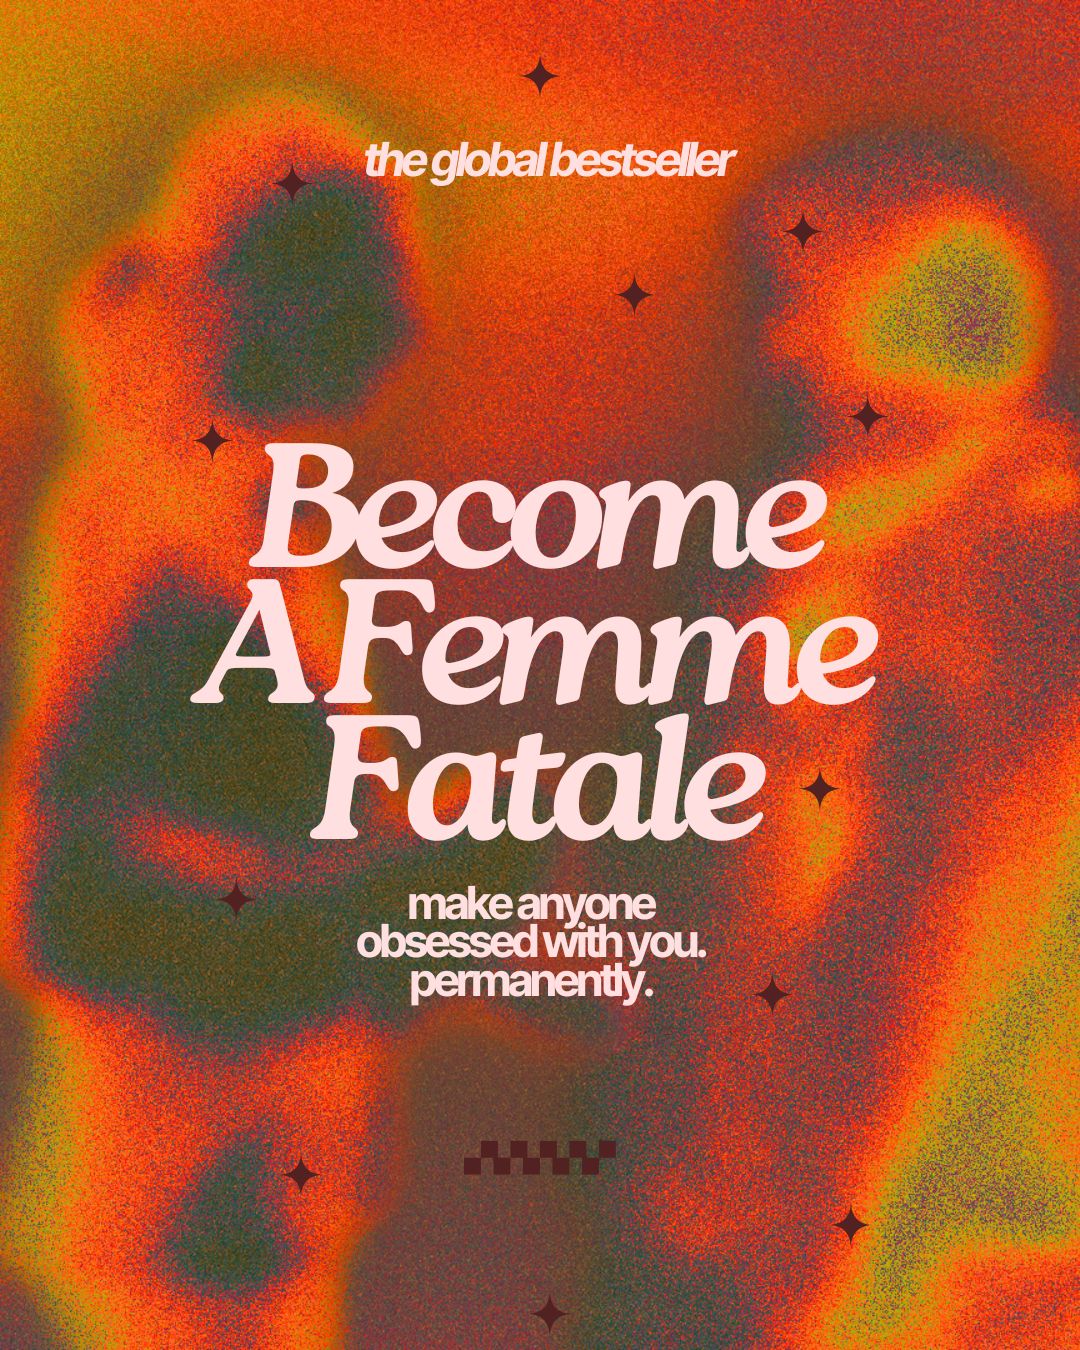 Becoming A Femme Fatale